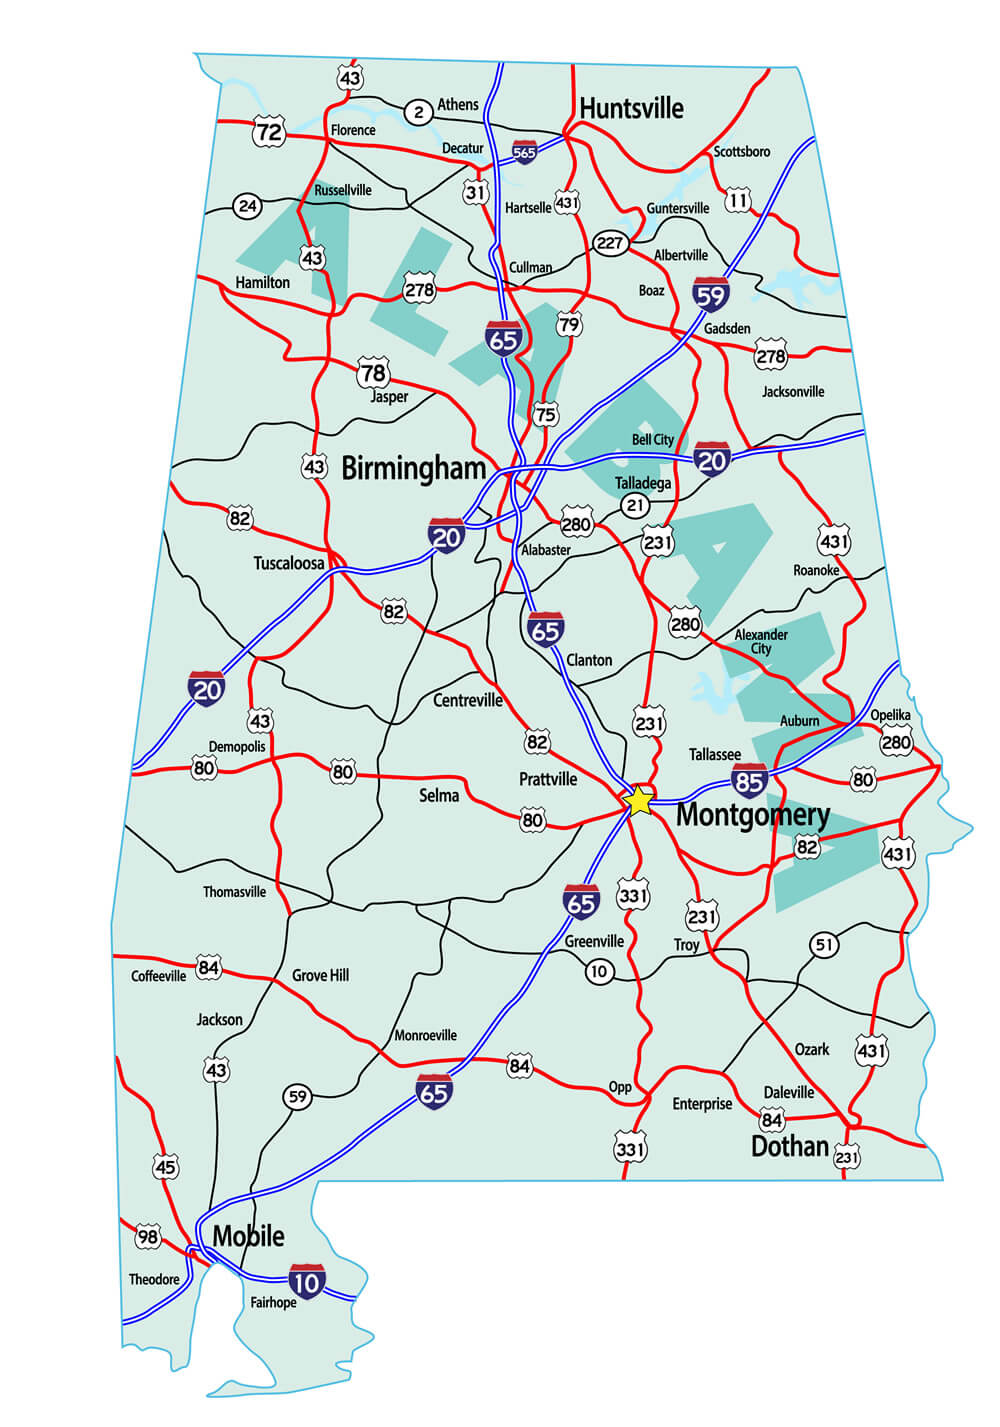 Alabama State Road Map with Interstates